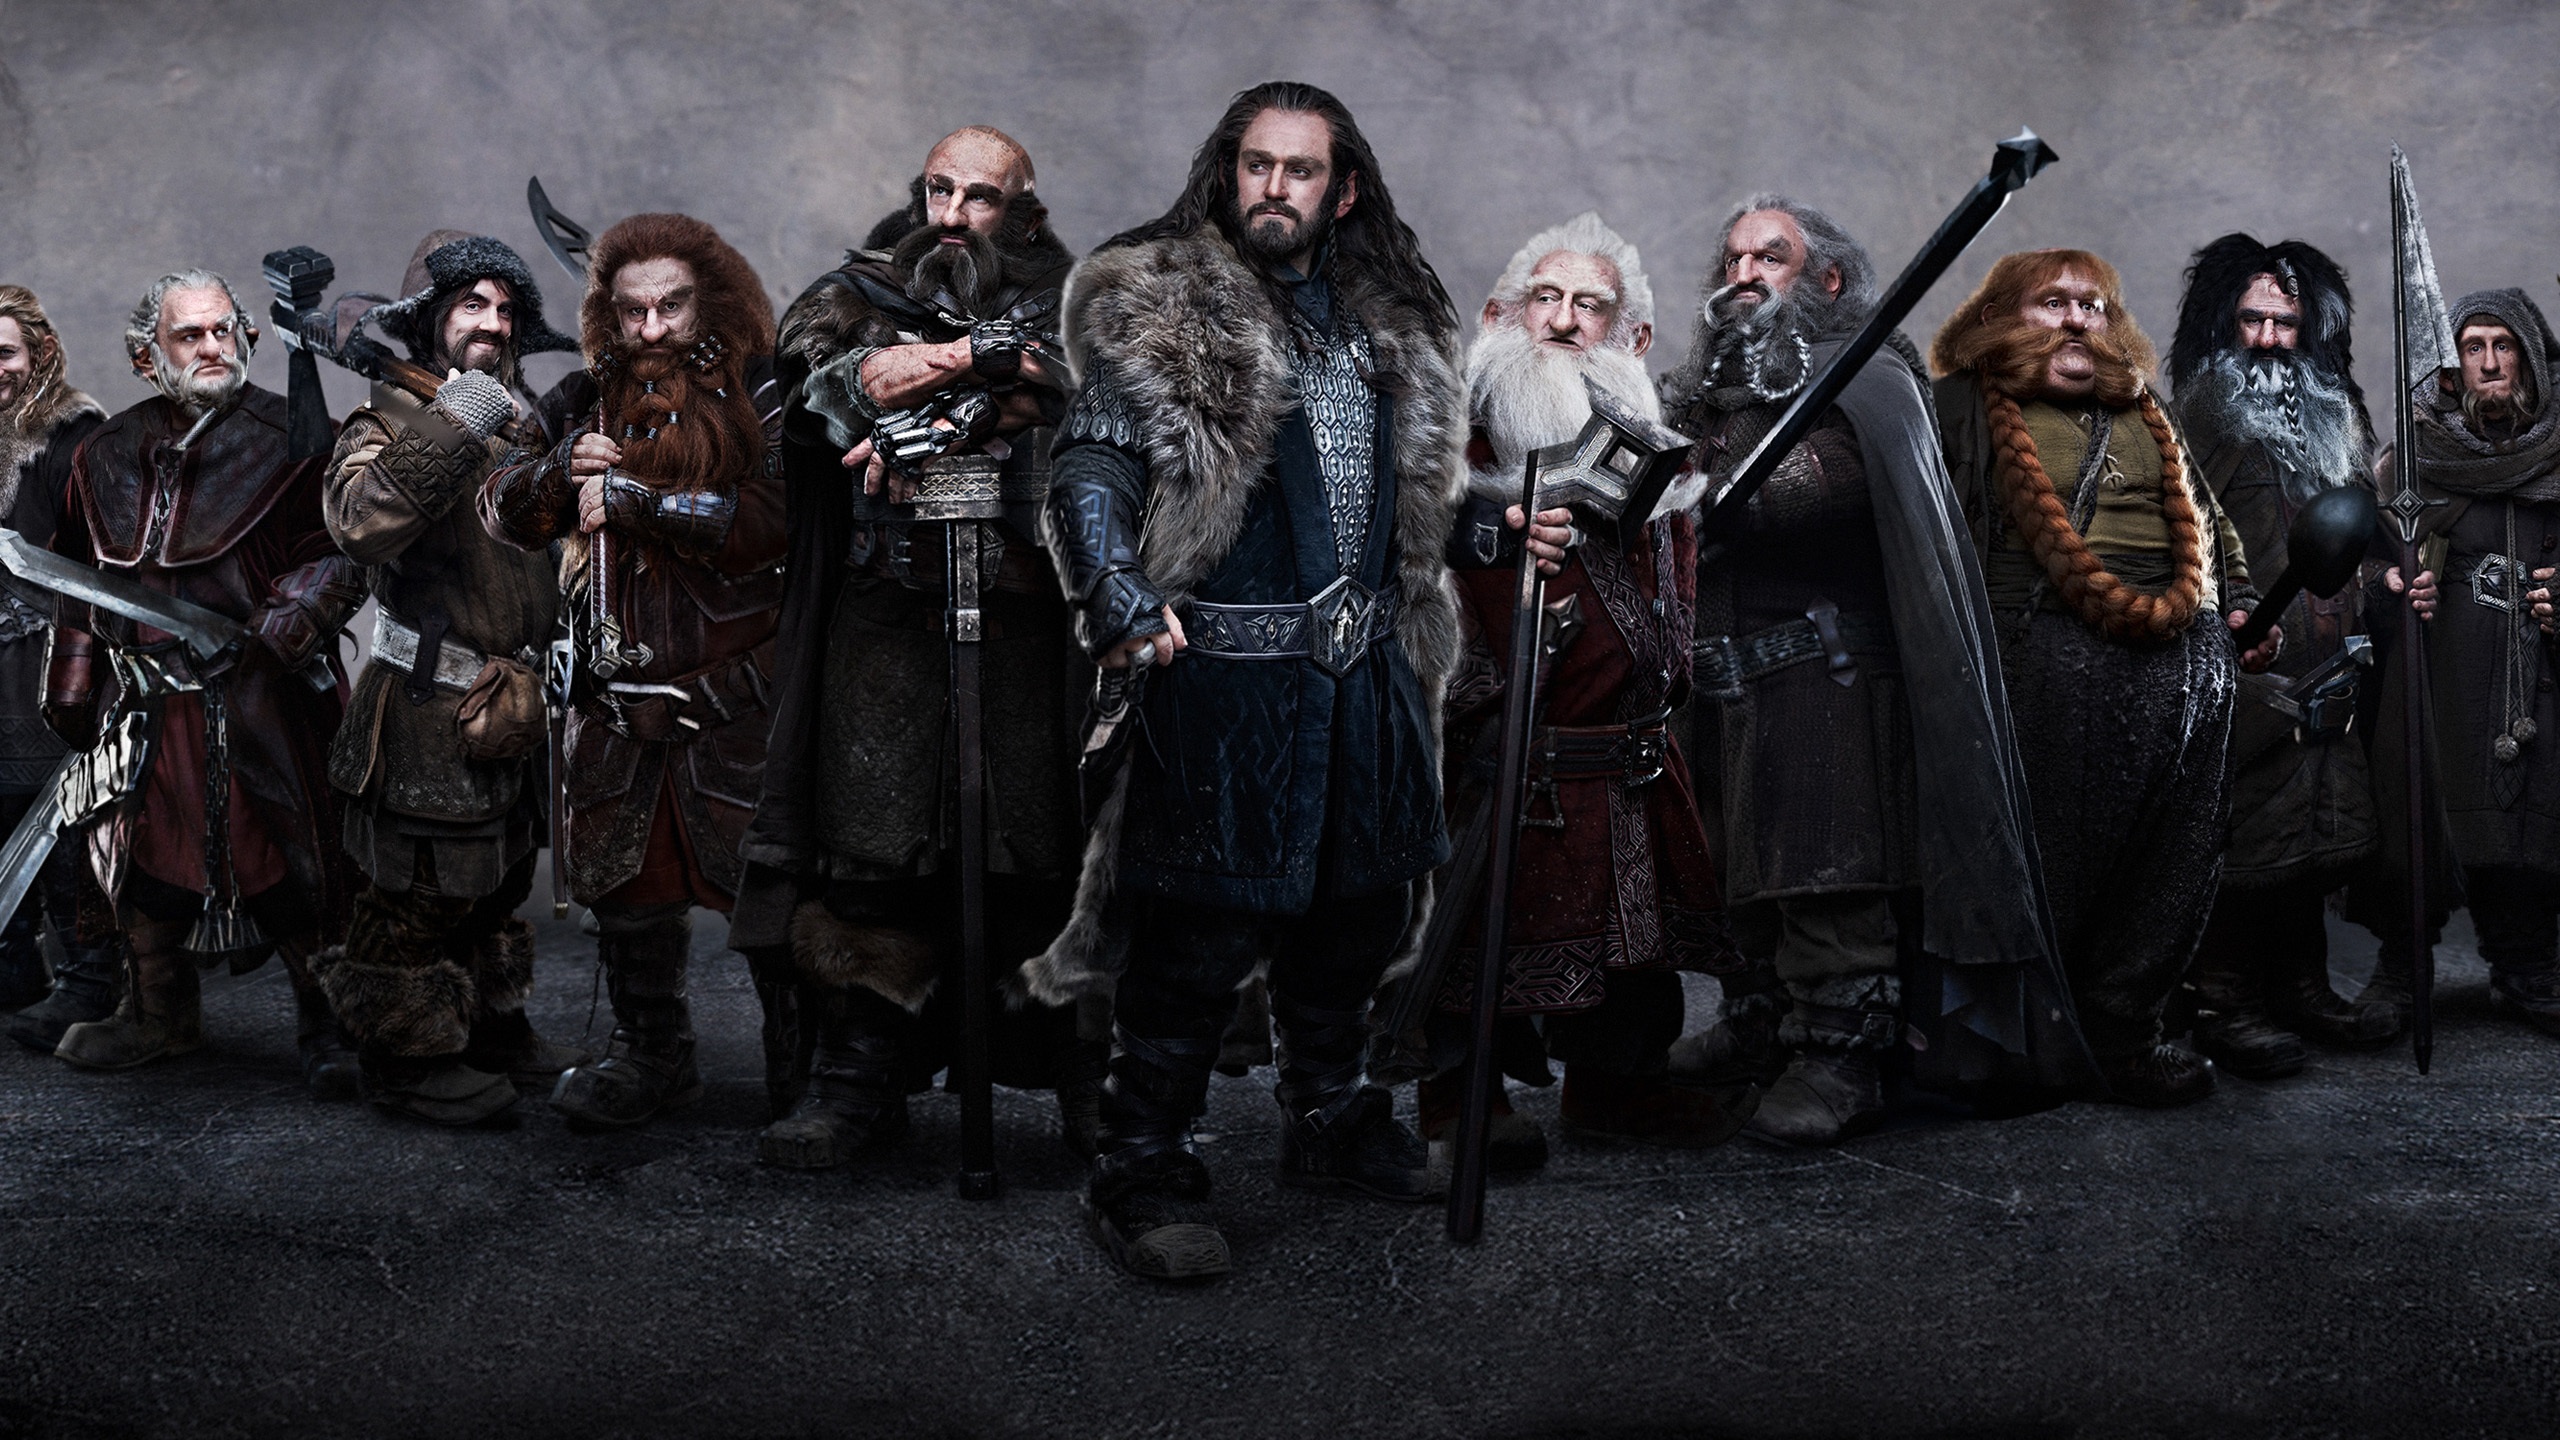 the hobbit movie Awesome Wallpapers 2560x1440